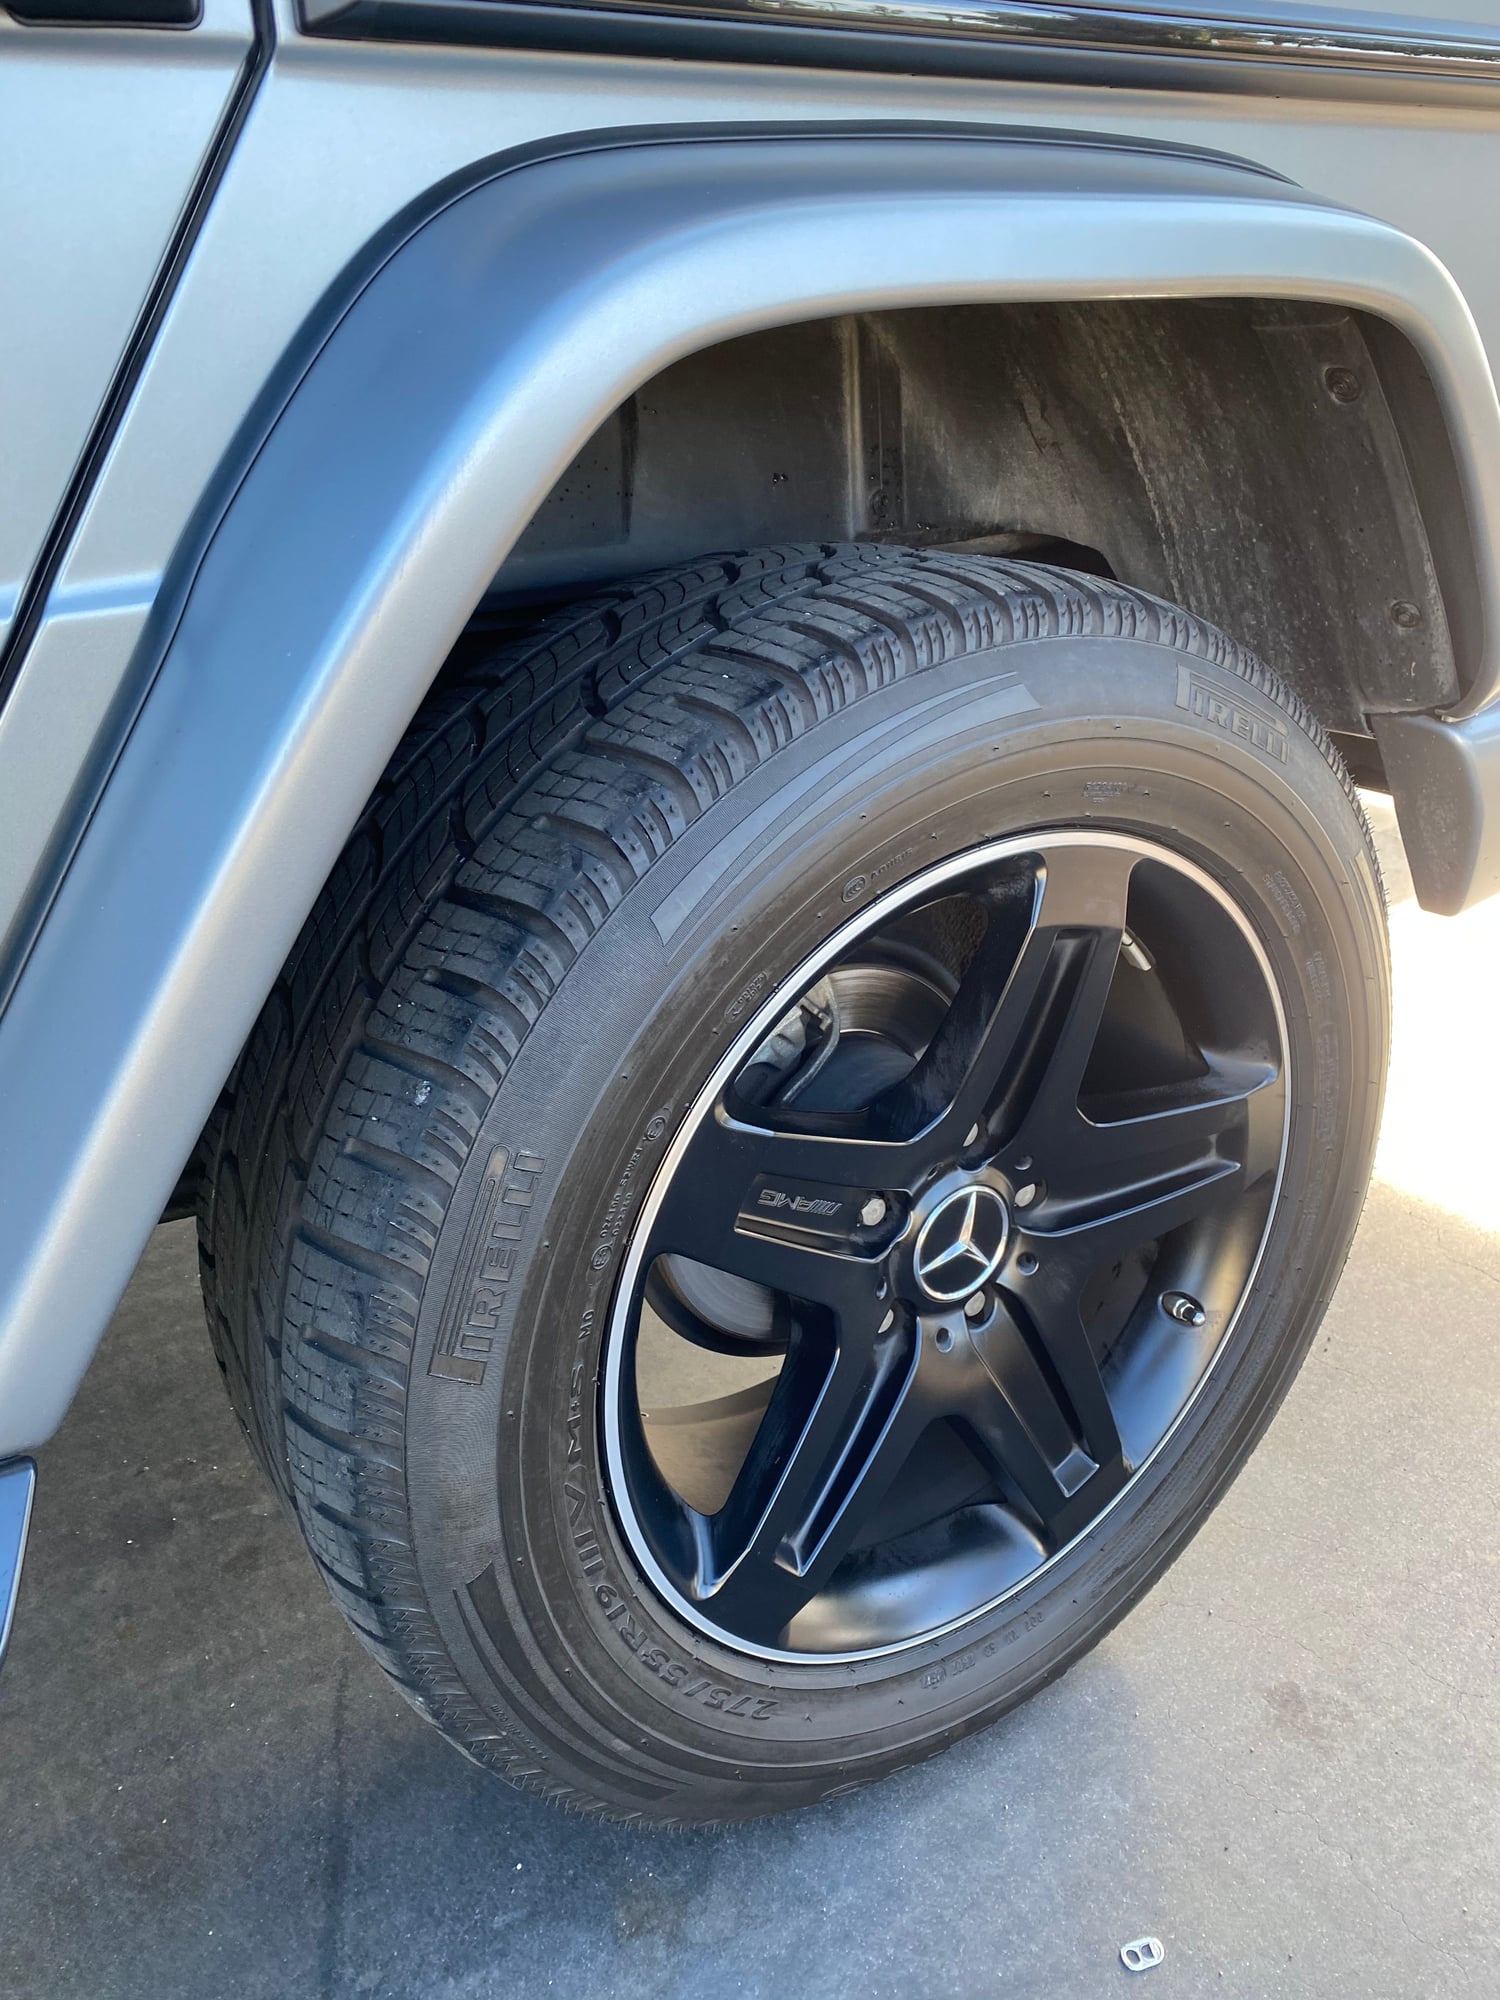 Wheels and Tires/Axles - 2018 G550 factory wheels - Used - 2018 Mercedes-Benz G550 - Carlsbad, NM 88220, United States